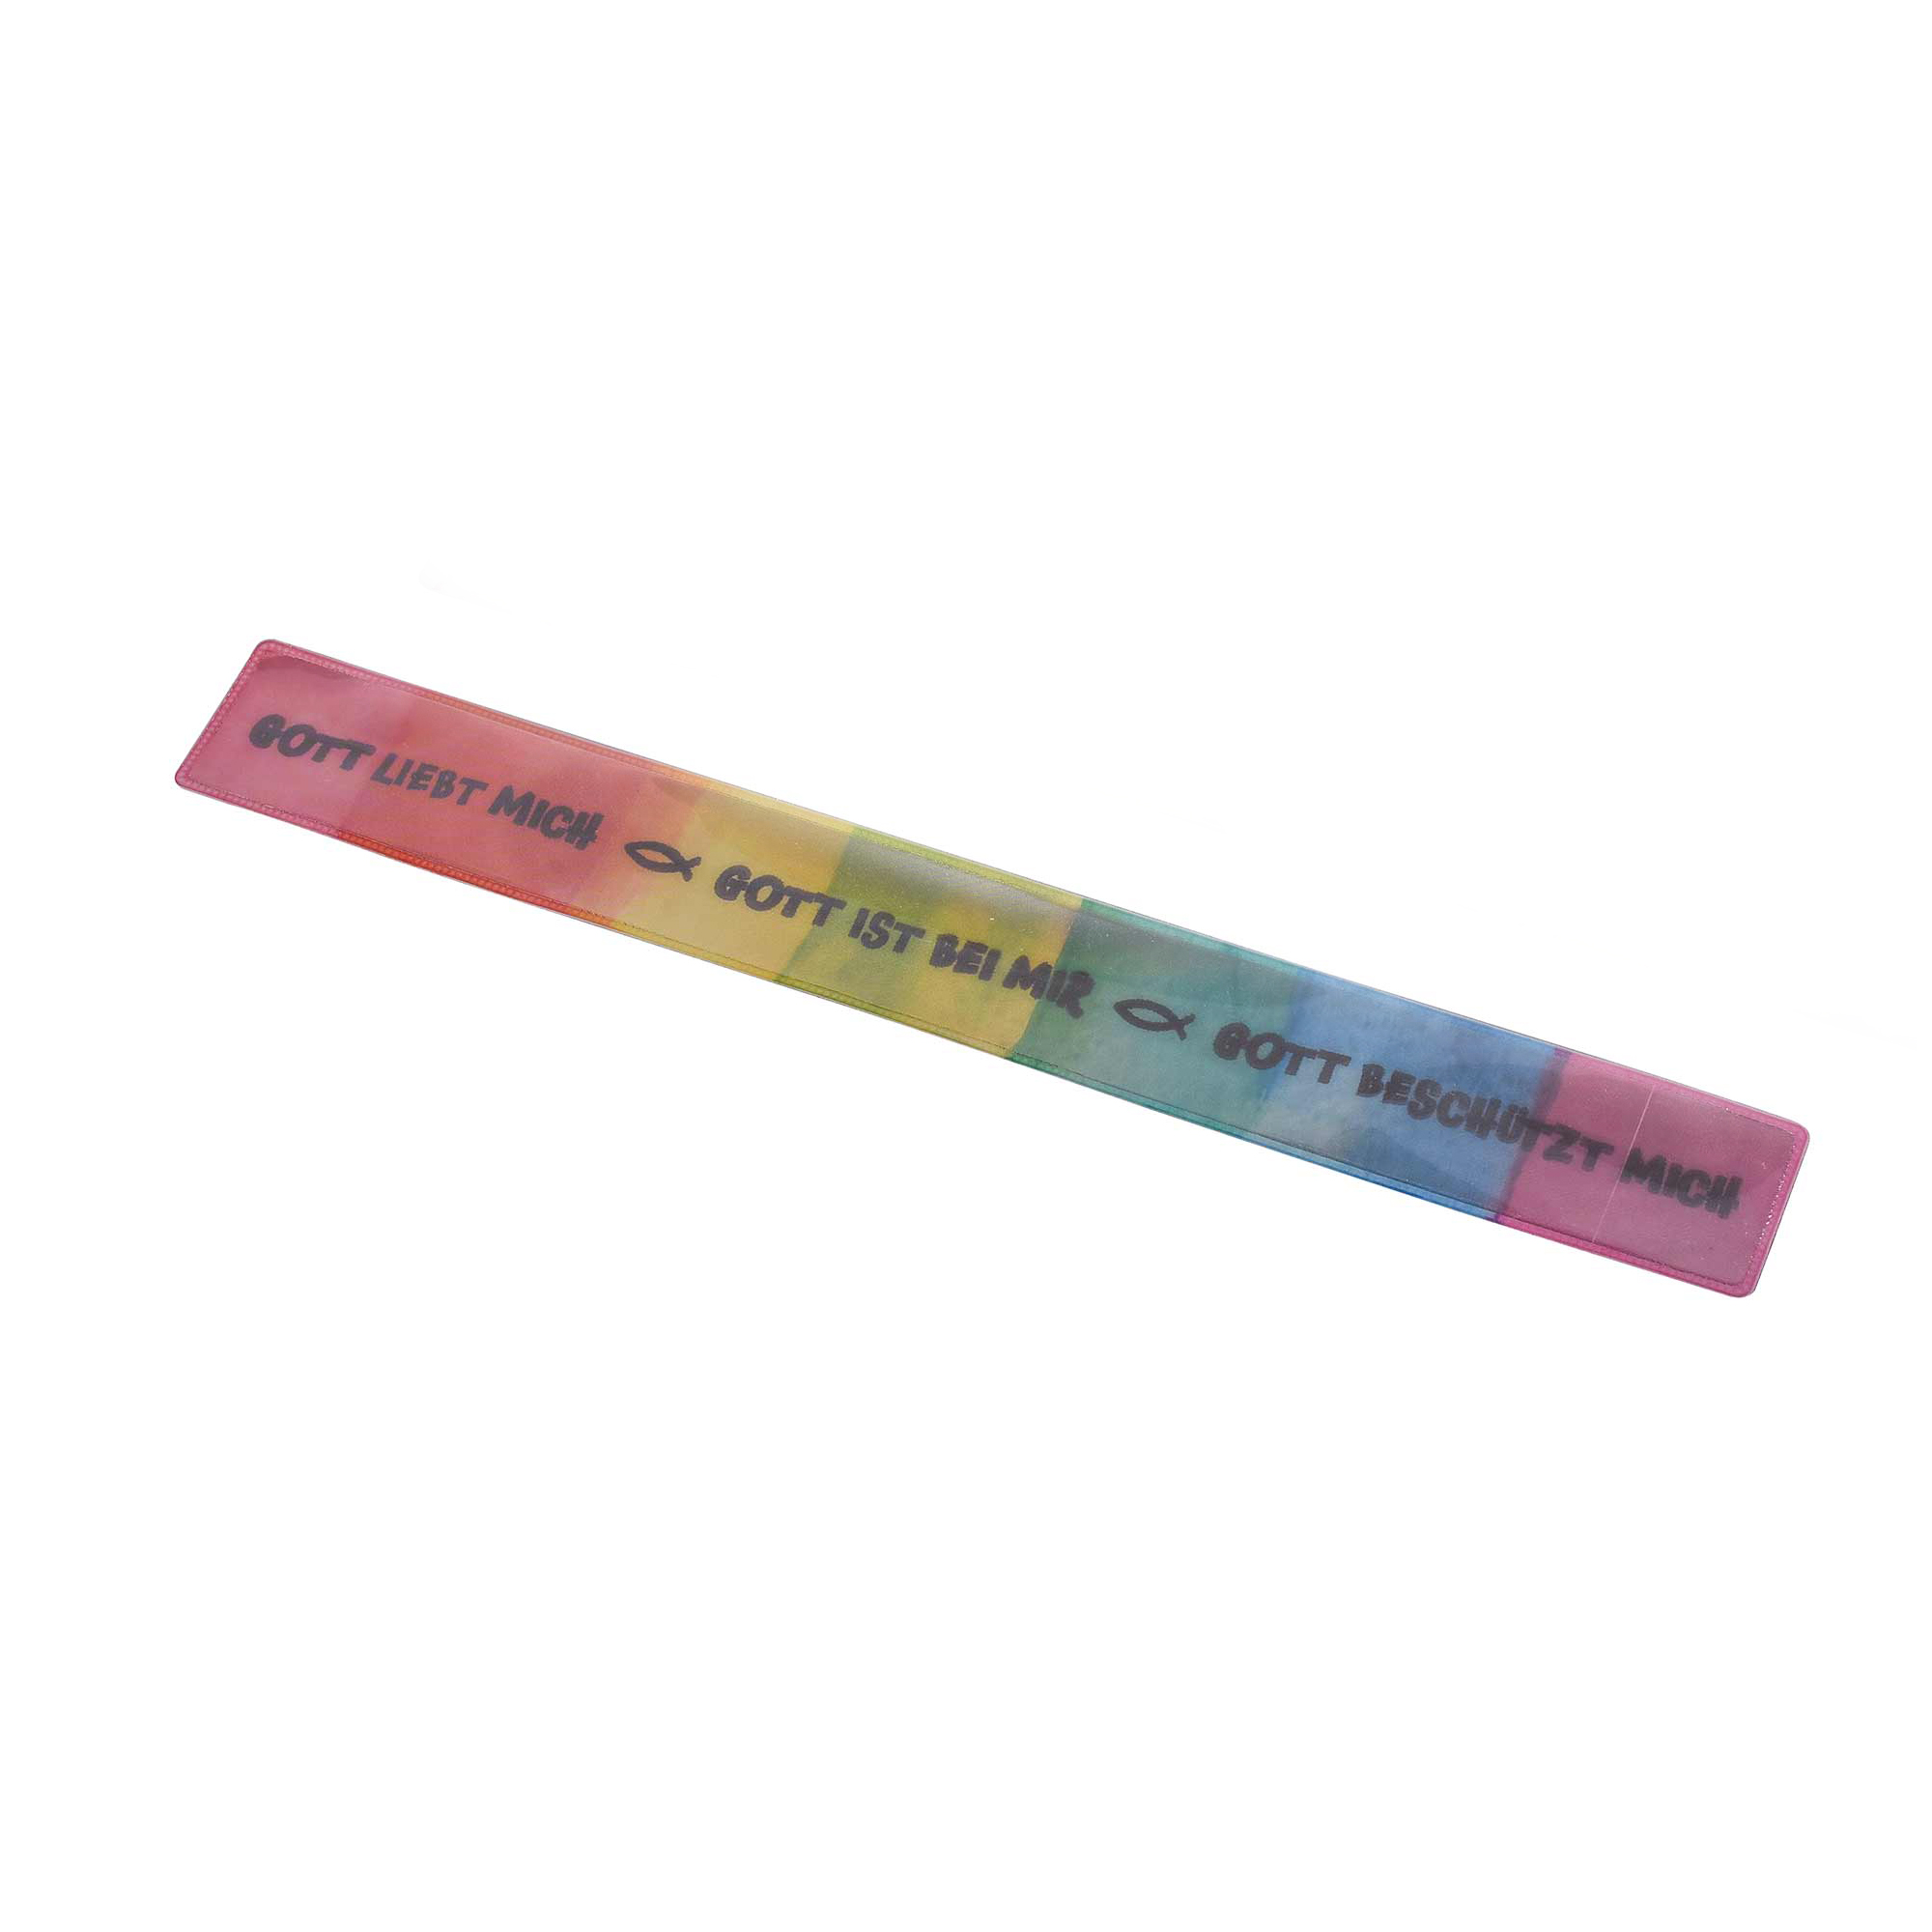 https://www.rauhes.de/images/product_images/original_images/Schnapparmband-reflektierend-Aquarell-613850.jpg